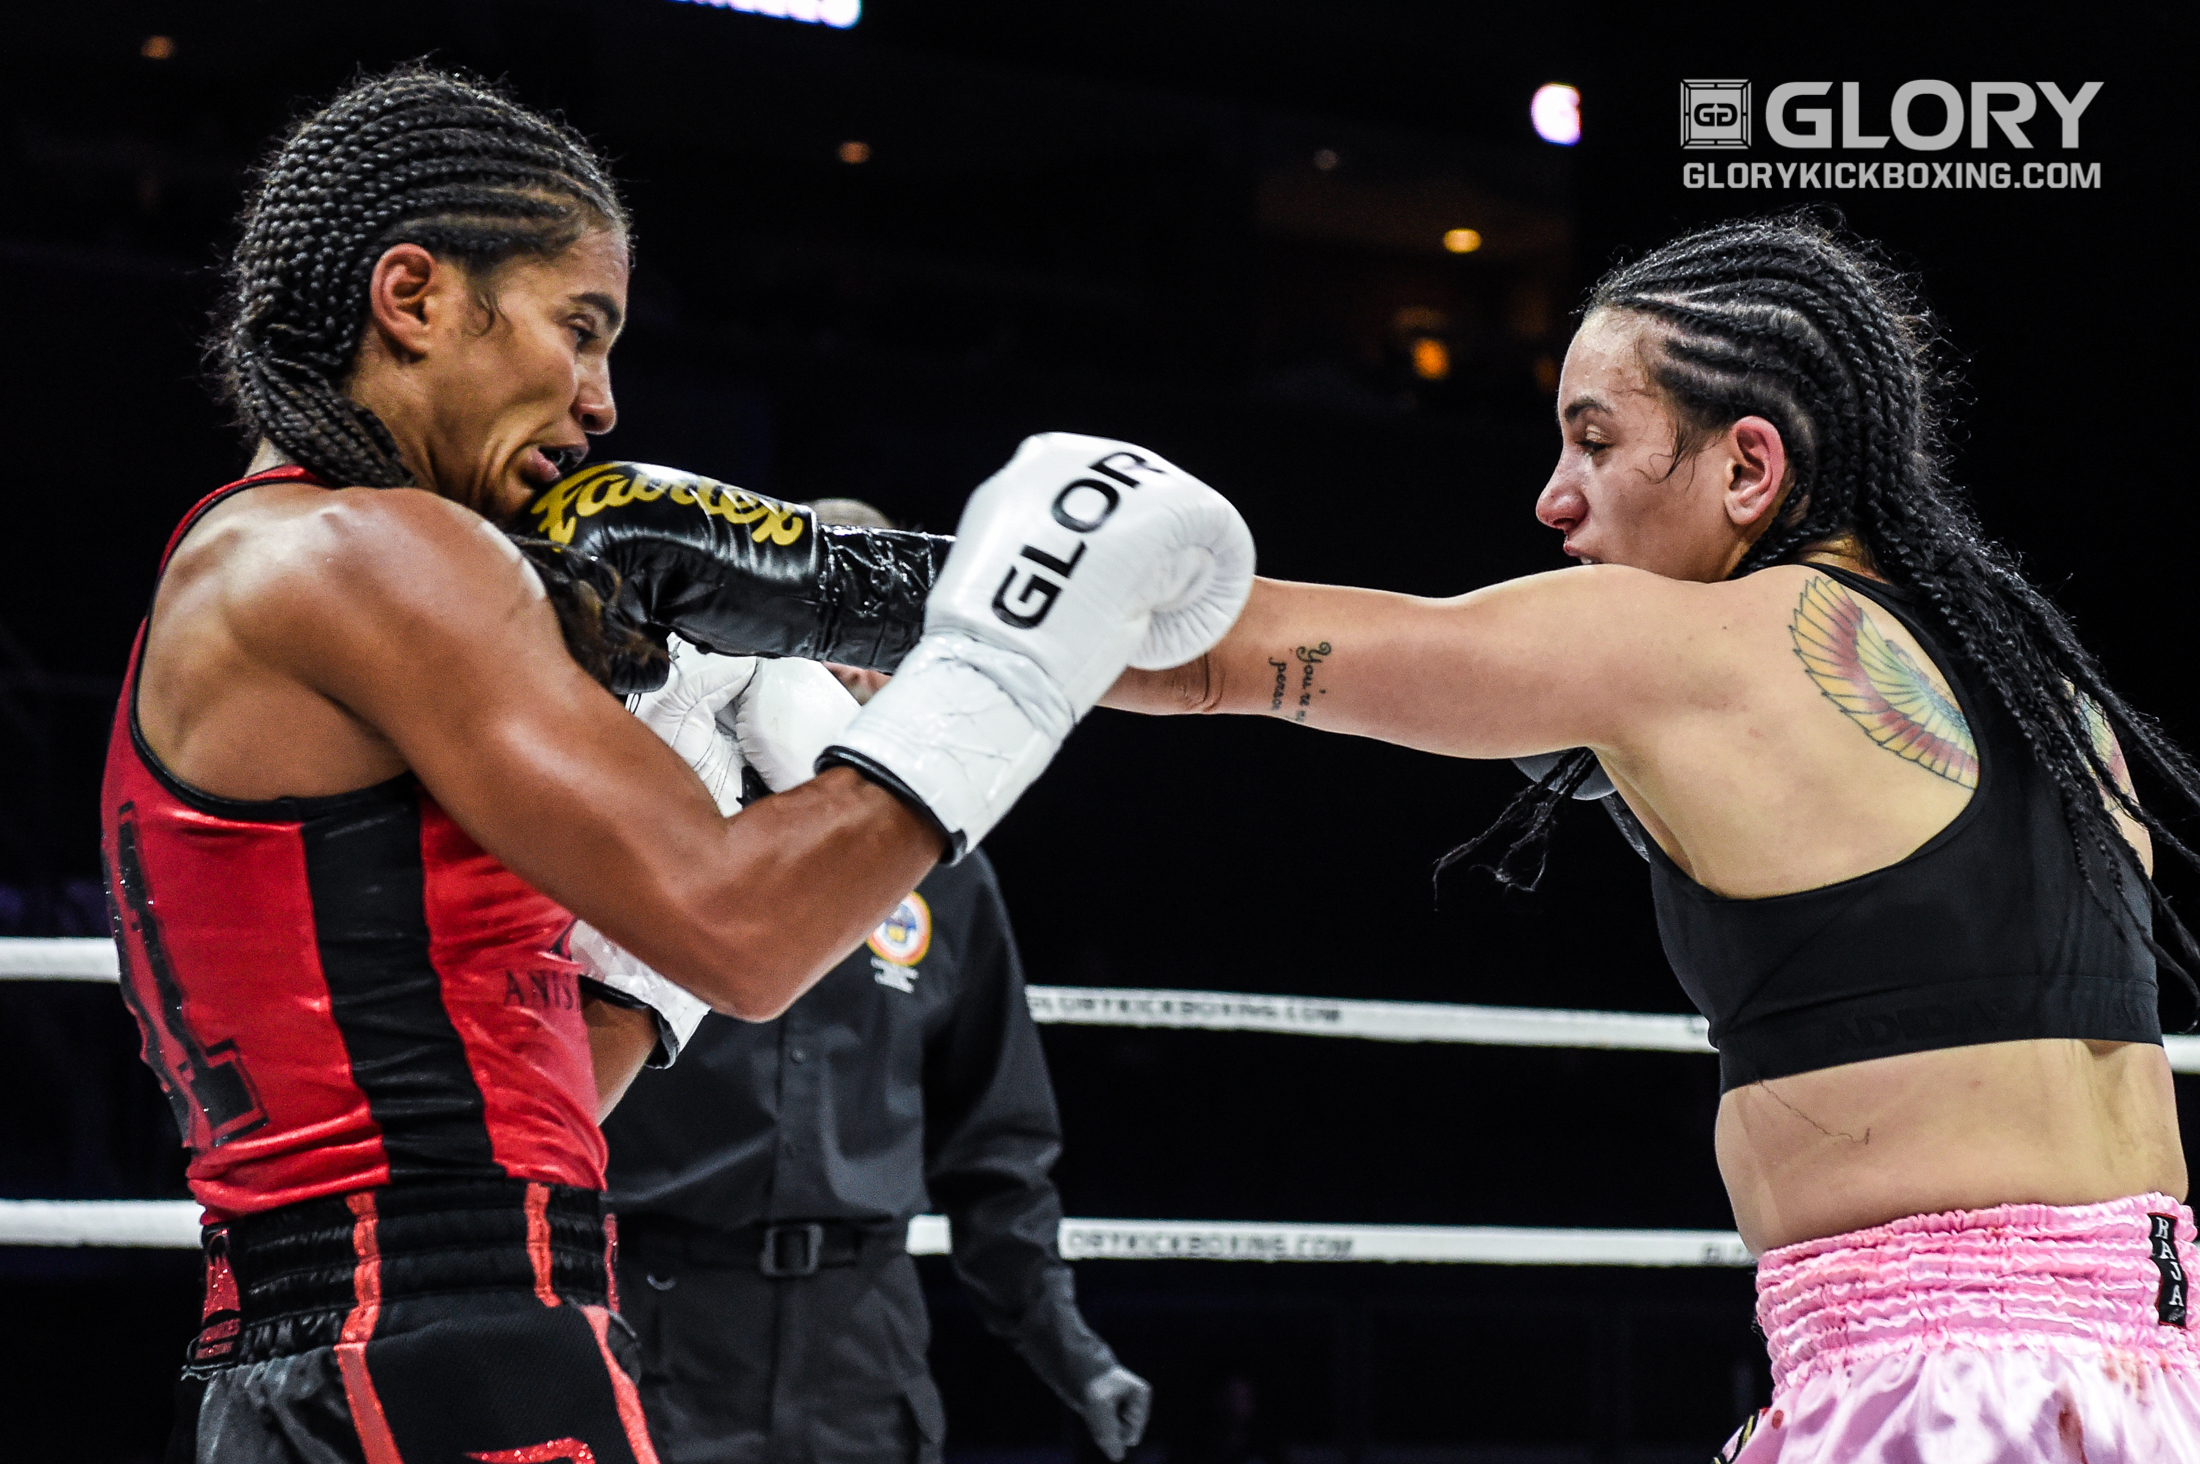 Menezes captures super bantamweight title with controversial decision win over Meksen